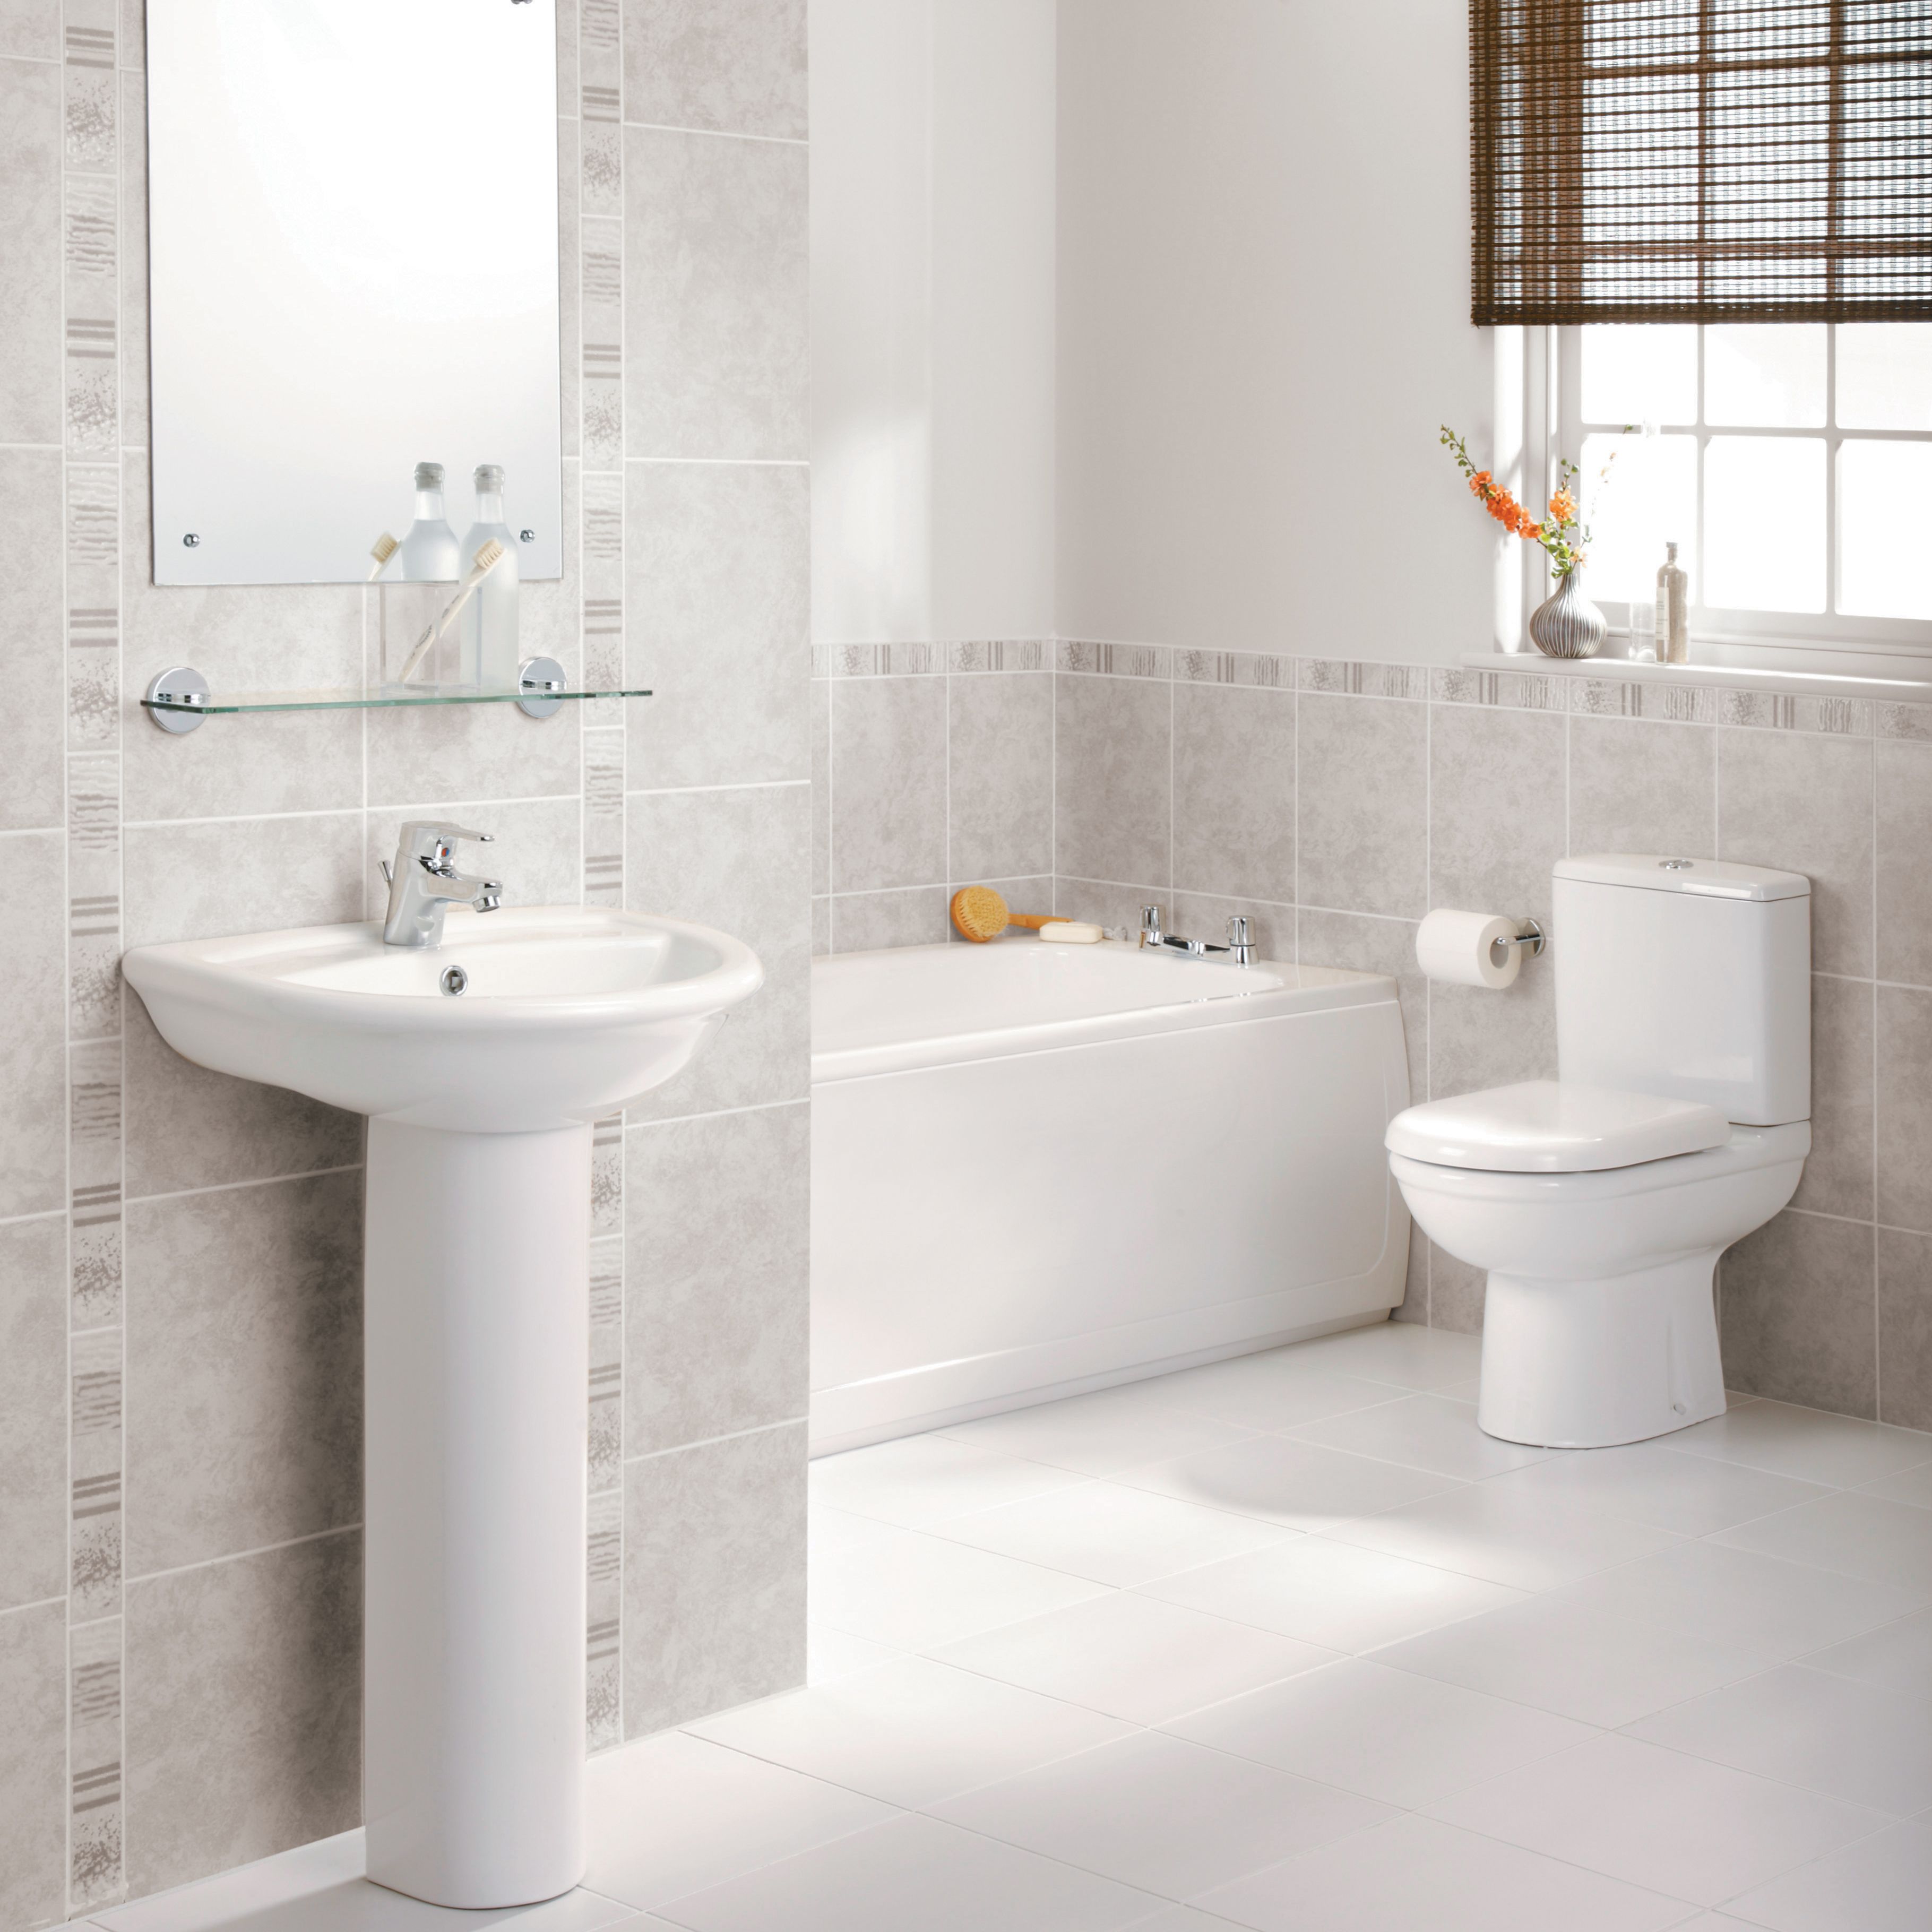 Ideal Standard Della Close-coupled Toilet with Soft close seat | DIY at B&Q